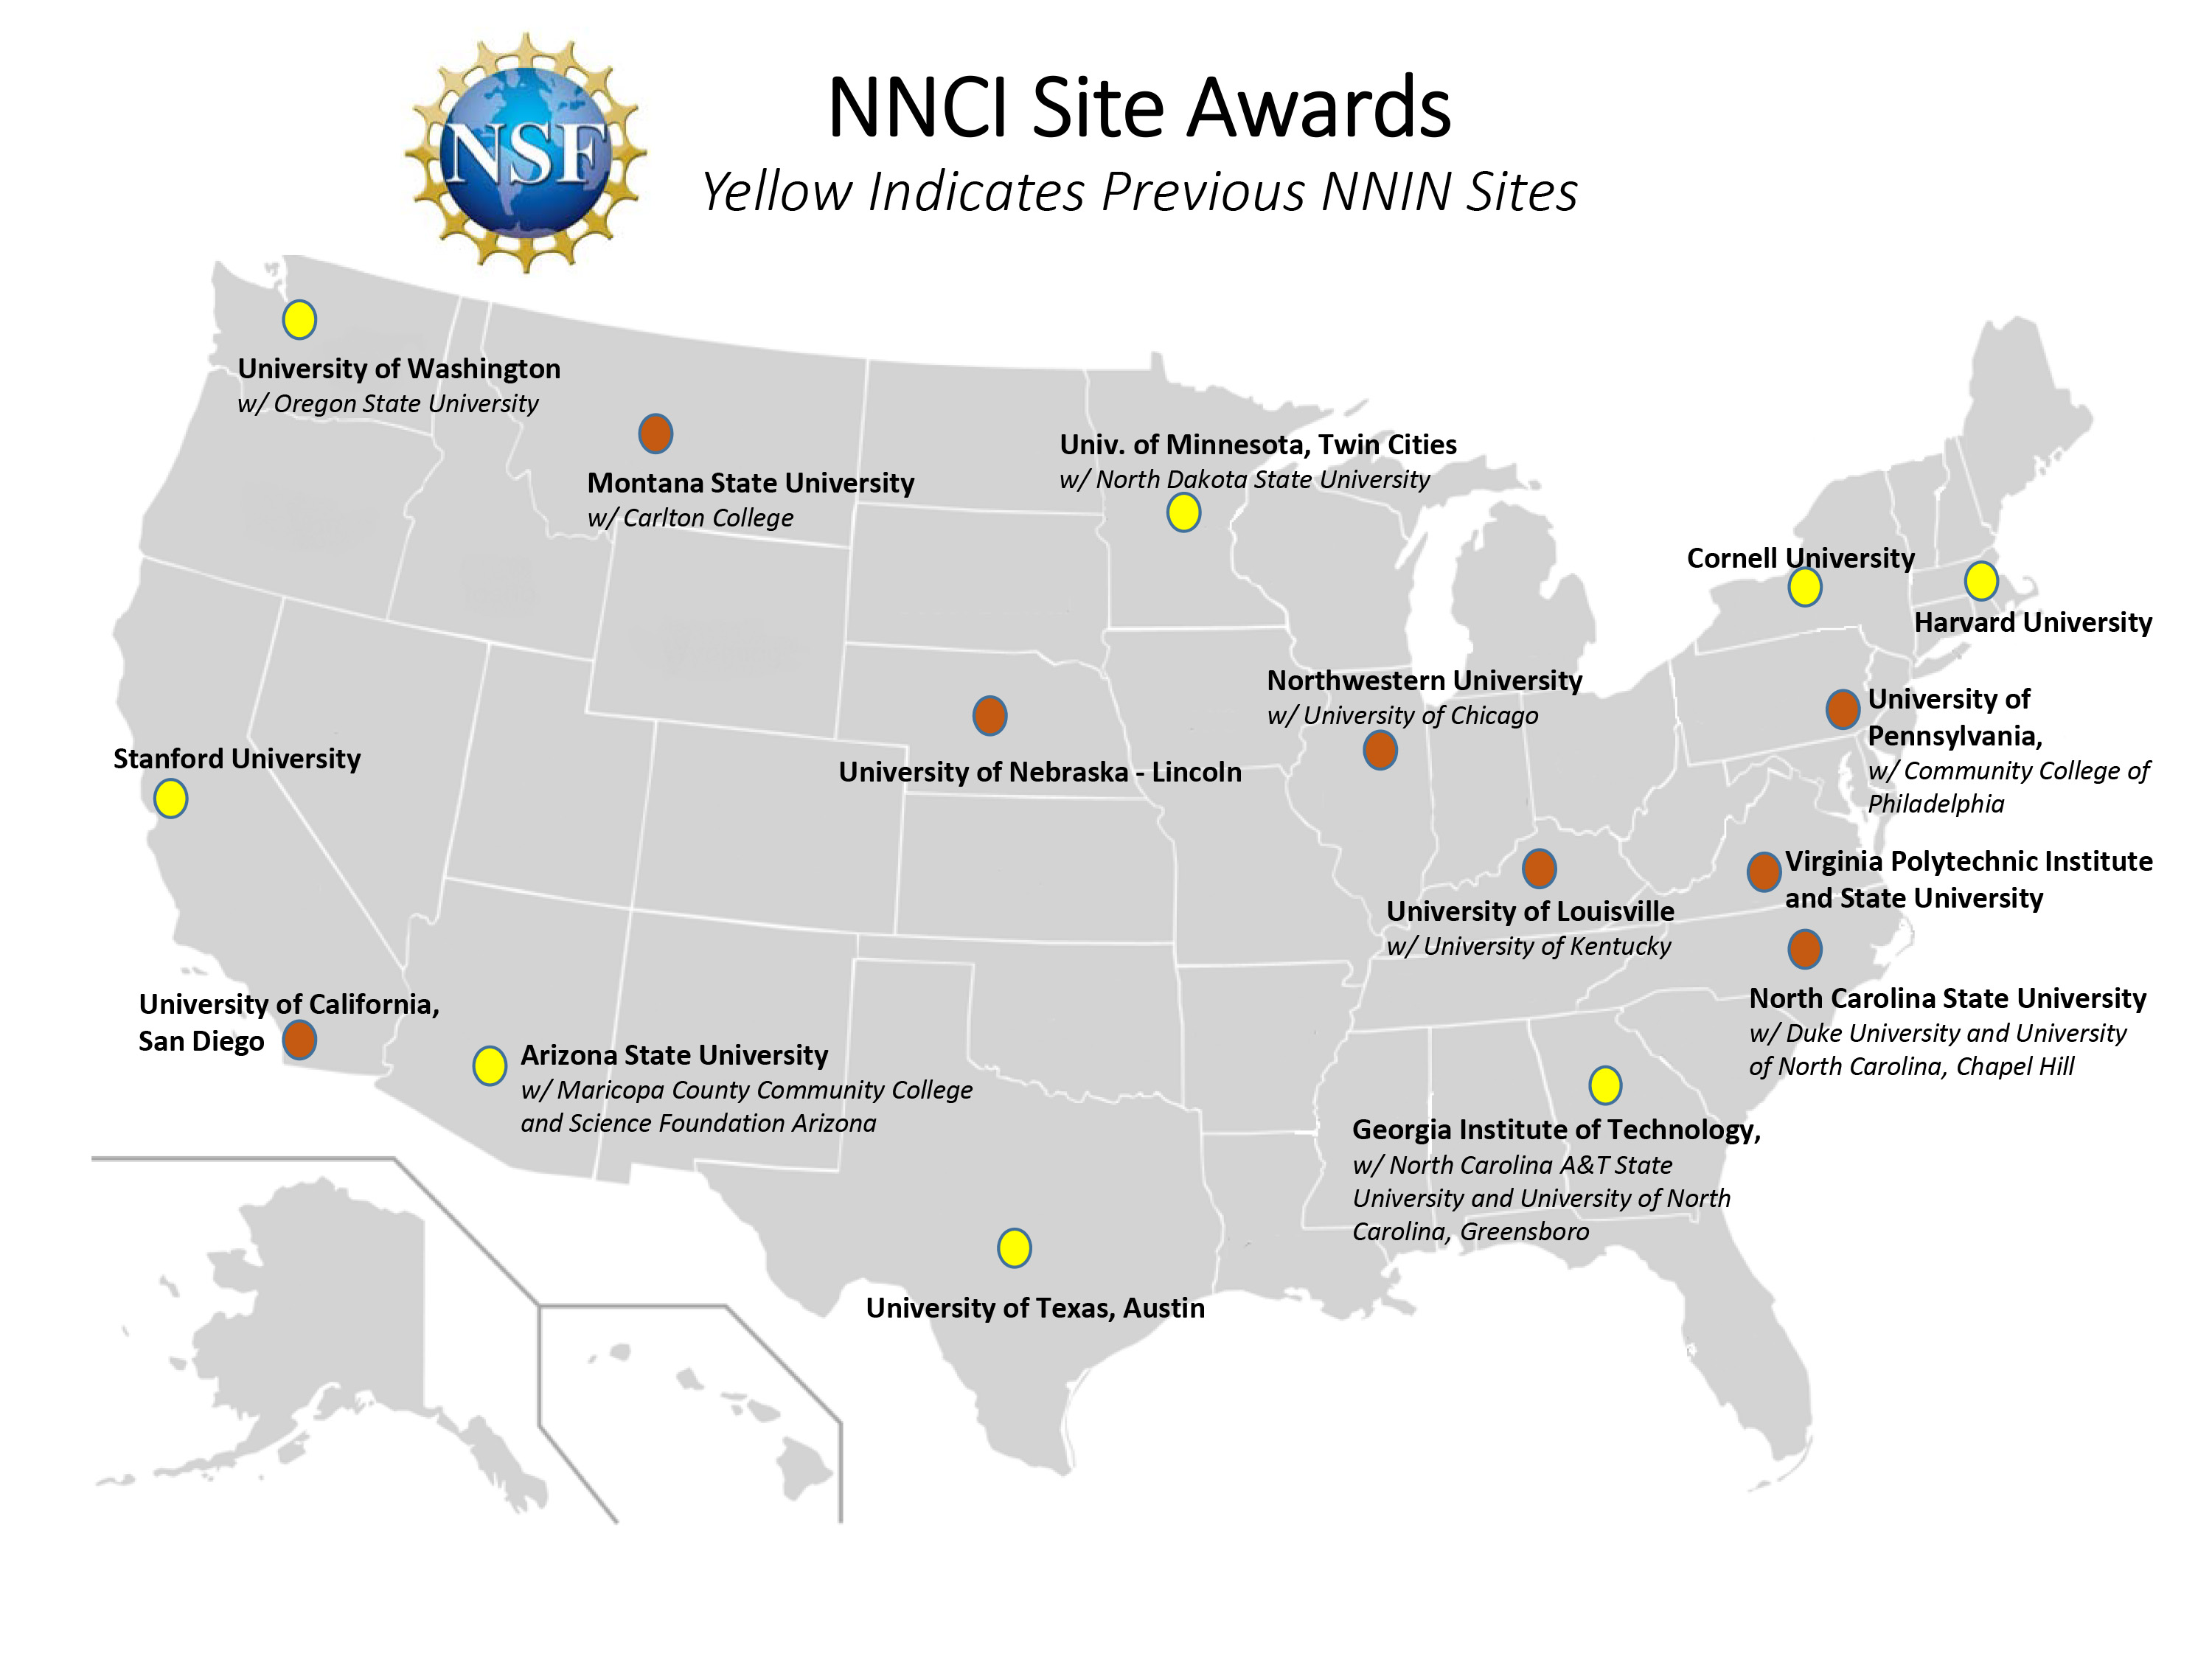 This map shows the locations of National Nanotechnology Coordinated Infrastructure (NNCI) sites. 